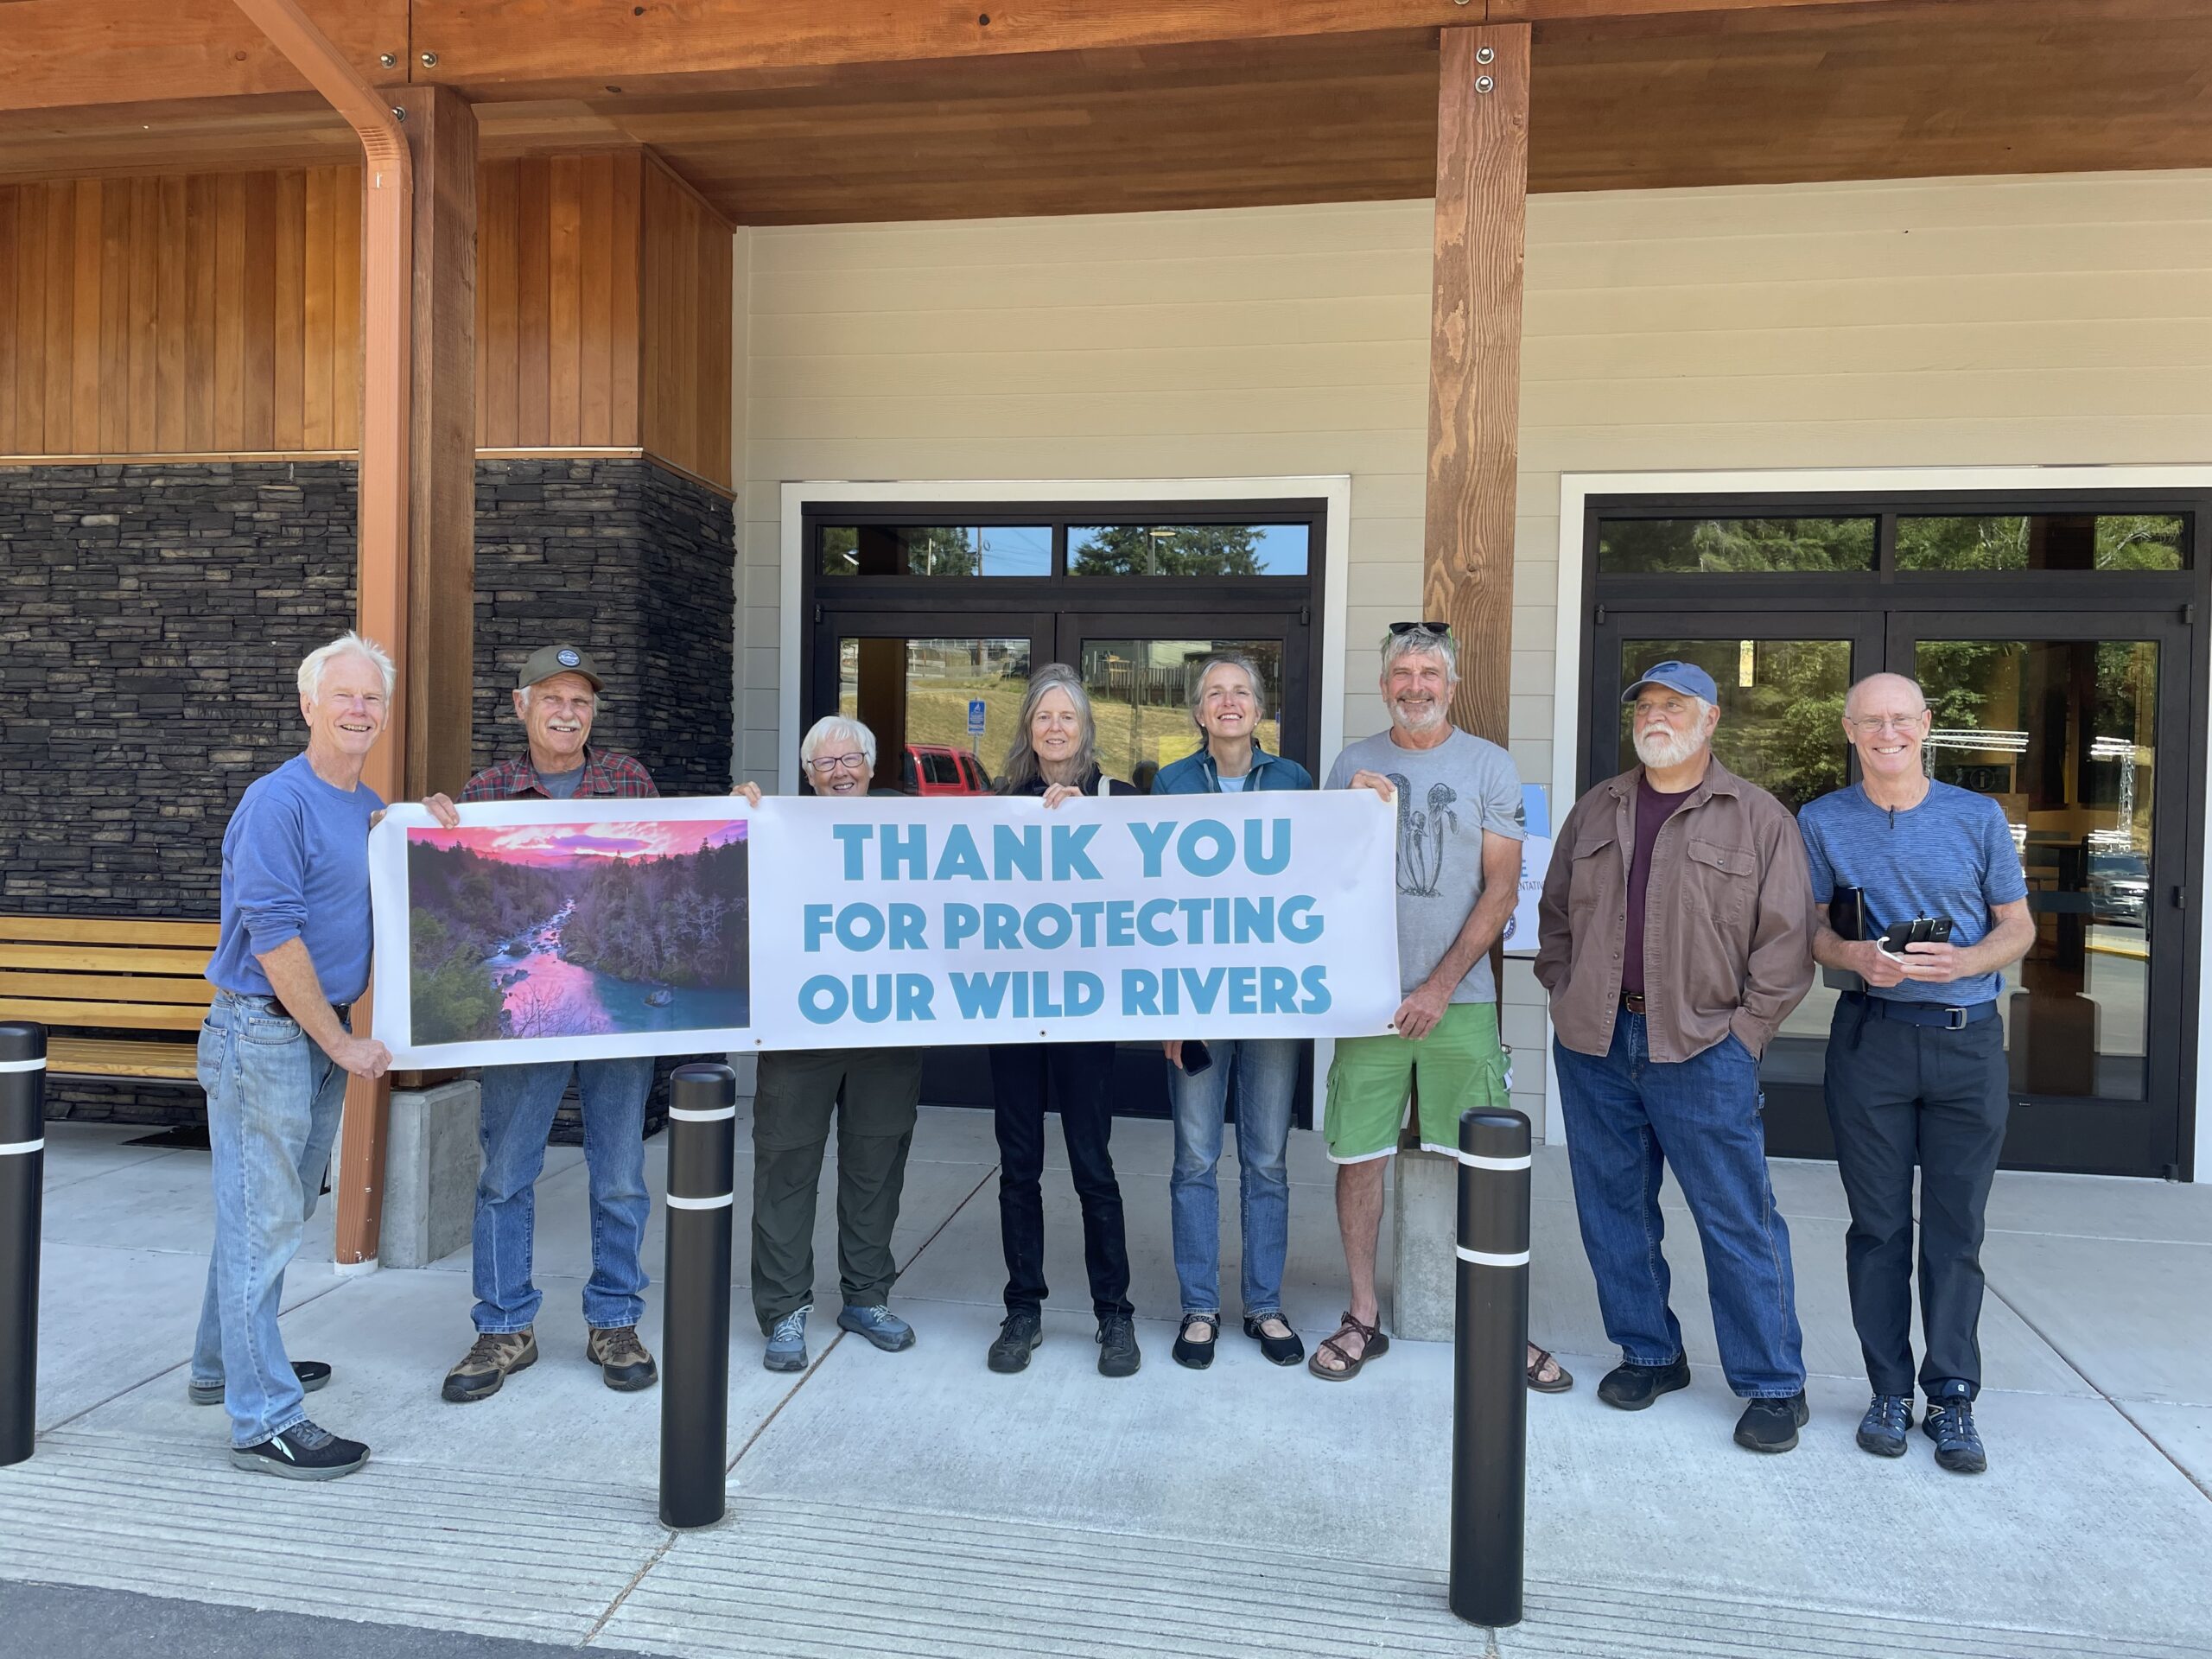 Fans and supporters in Gold Beach Oregon welcome and appreciate Senator Wyden and Congresswoman Hoyle on July 29 for their work to protect the rivers of America’s Wild Rivers Coast.